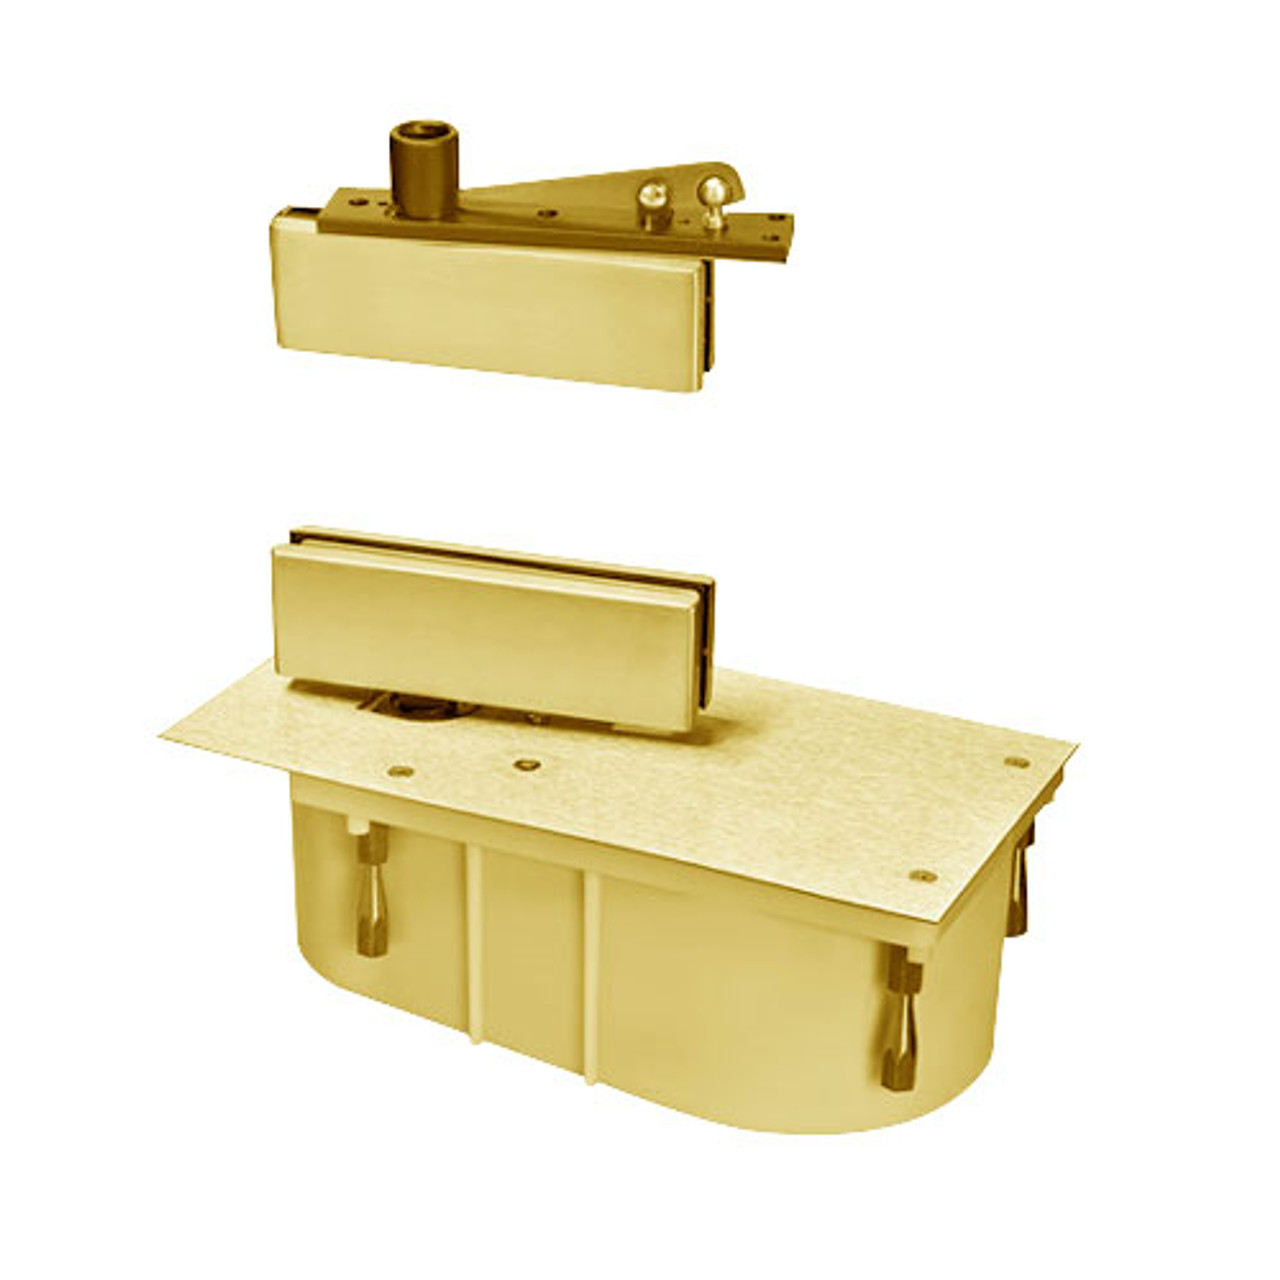 428-105S-RH-605 Rixson 428 Series Heavy Duty Single Acting Center Hung Floor Closer with Patch Fittings in Bright Brass Finish